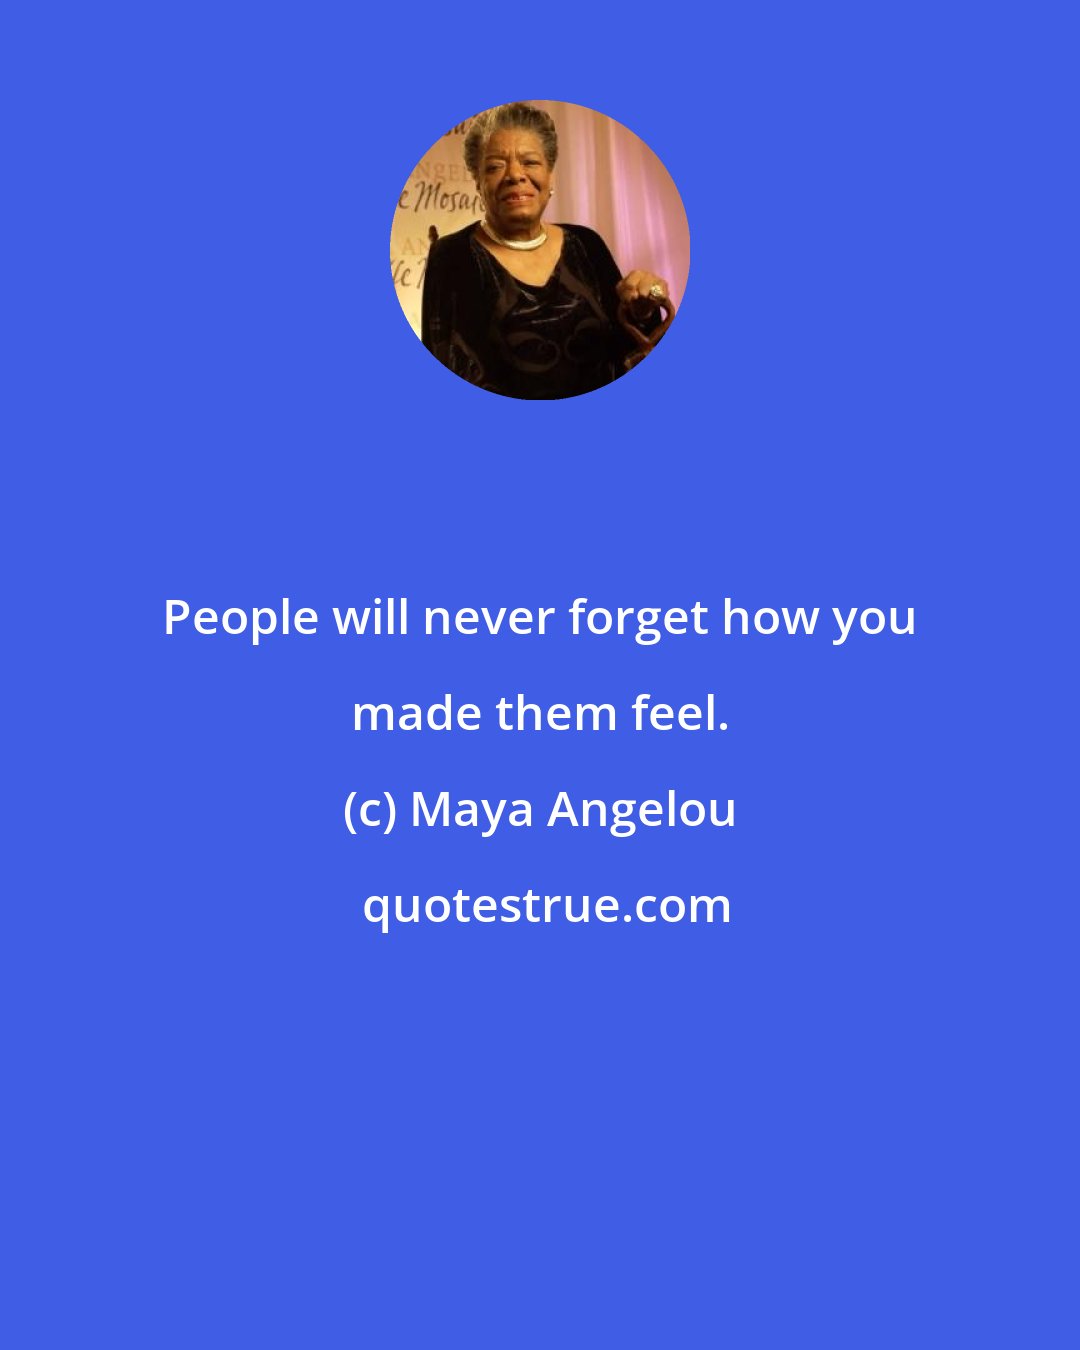 Maya Angelou: People will never forget how you made them feel.